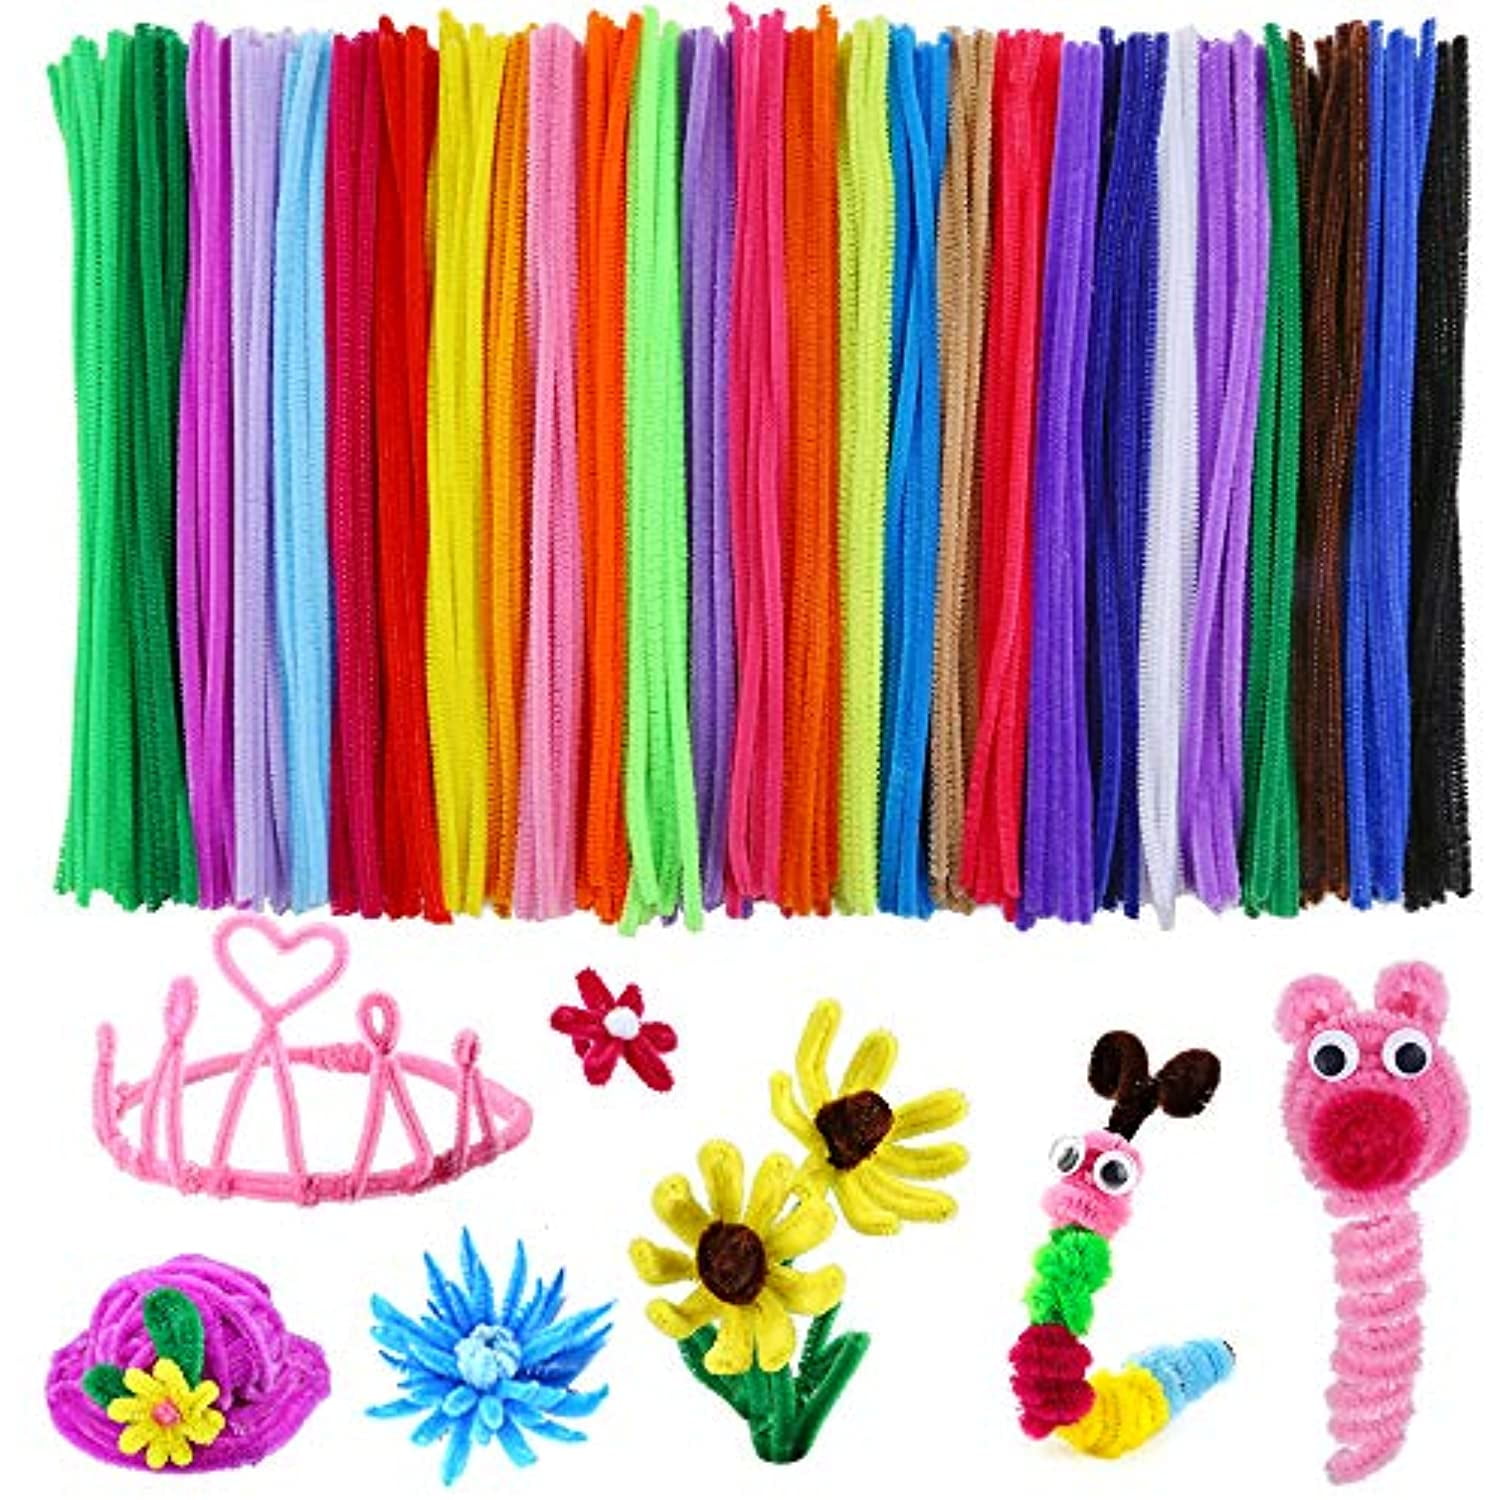 Caydo 200 Pieces Red Pipe Cleaners Chenille Stems for Kids Art Creative Crafts DIY Decorations 6 mm x 12 Inch 